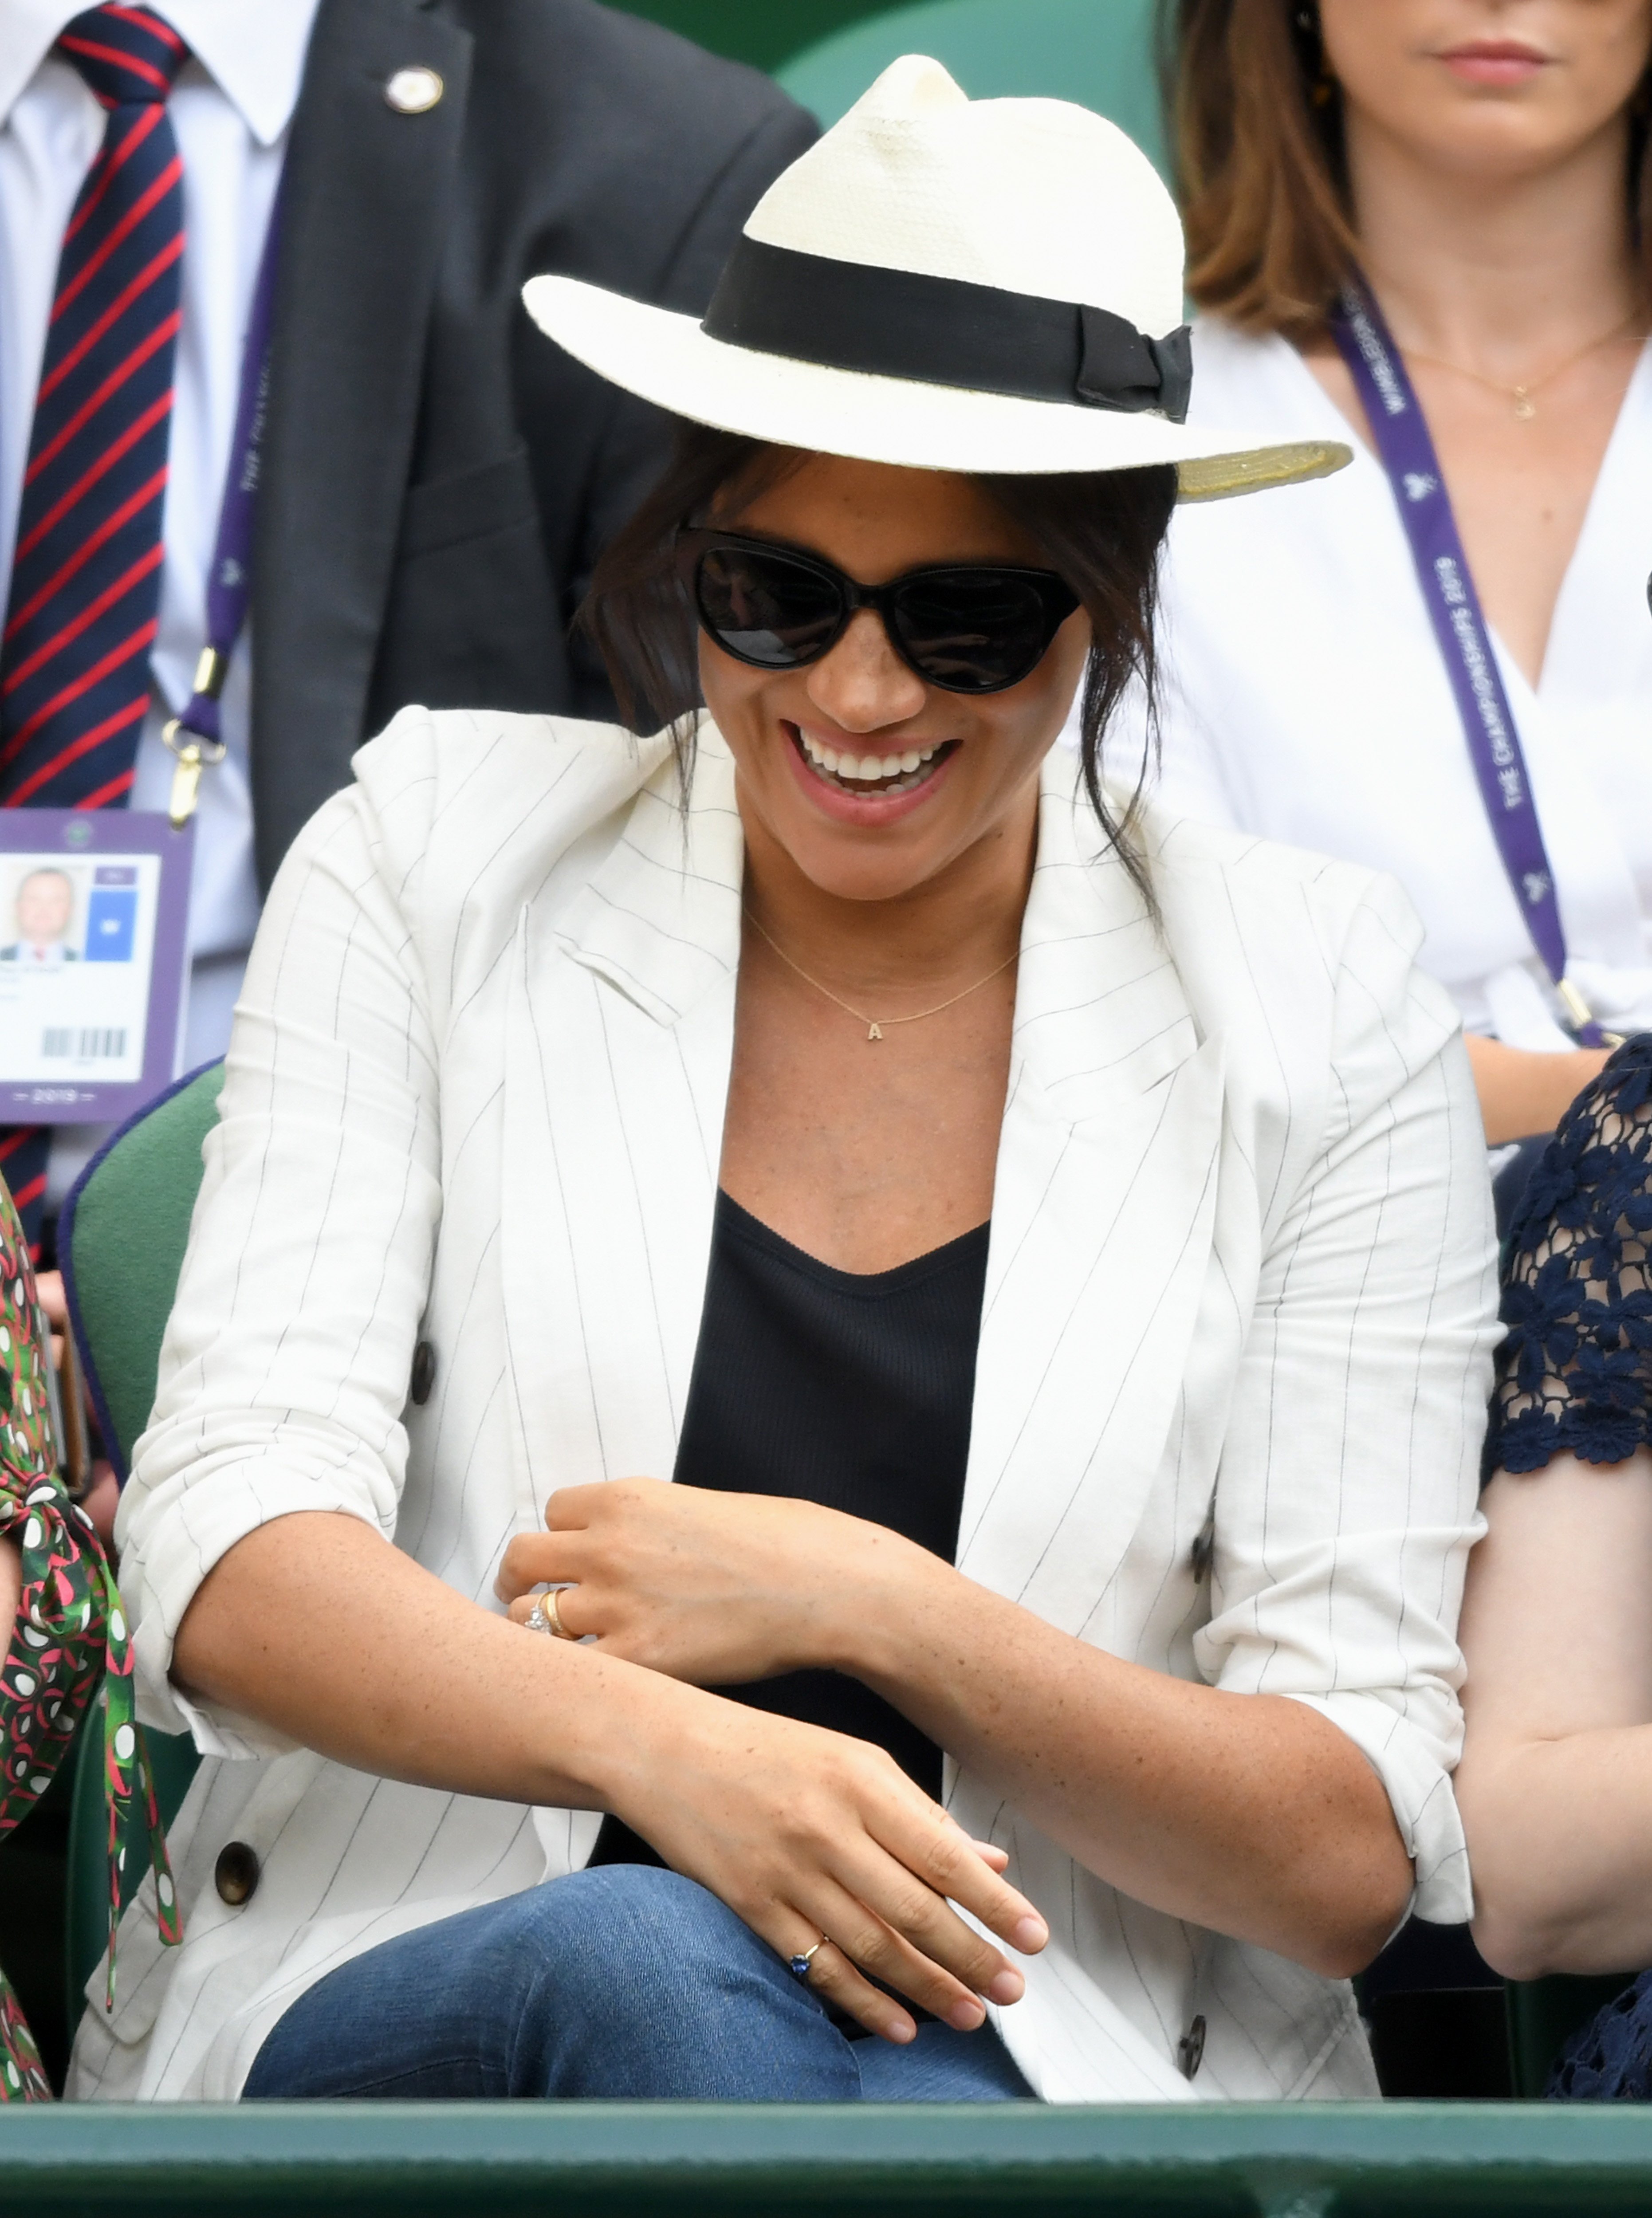 Meghan Markle, Duchess of Sussex at Wimbledon 2019 in London on July 04, 2019. |Photo: Getty Images